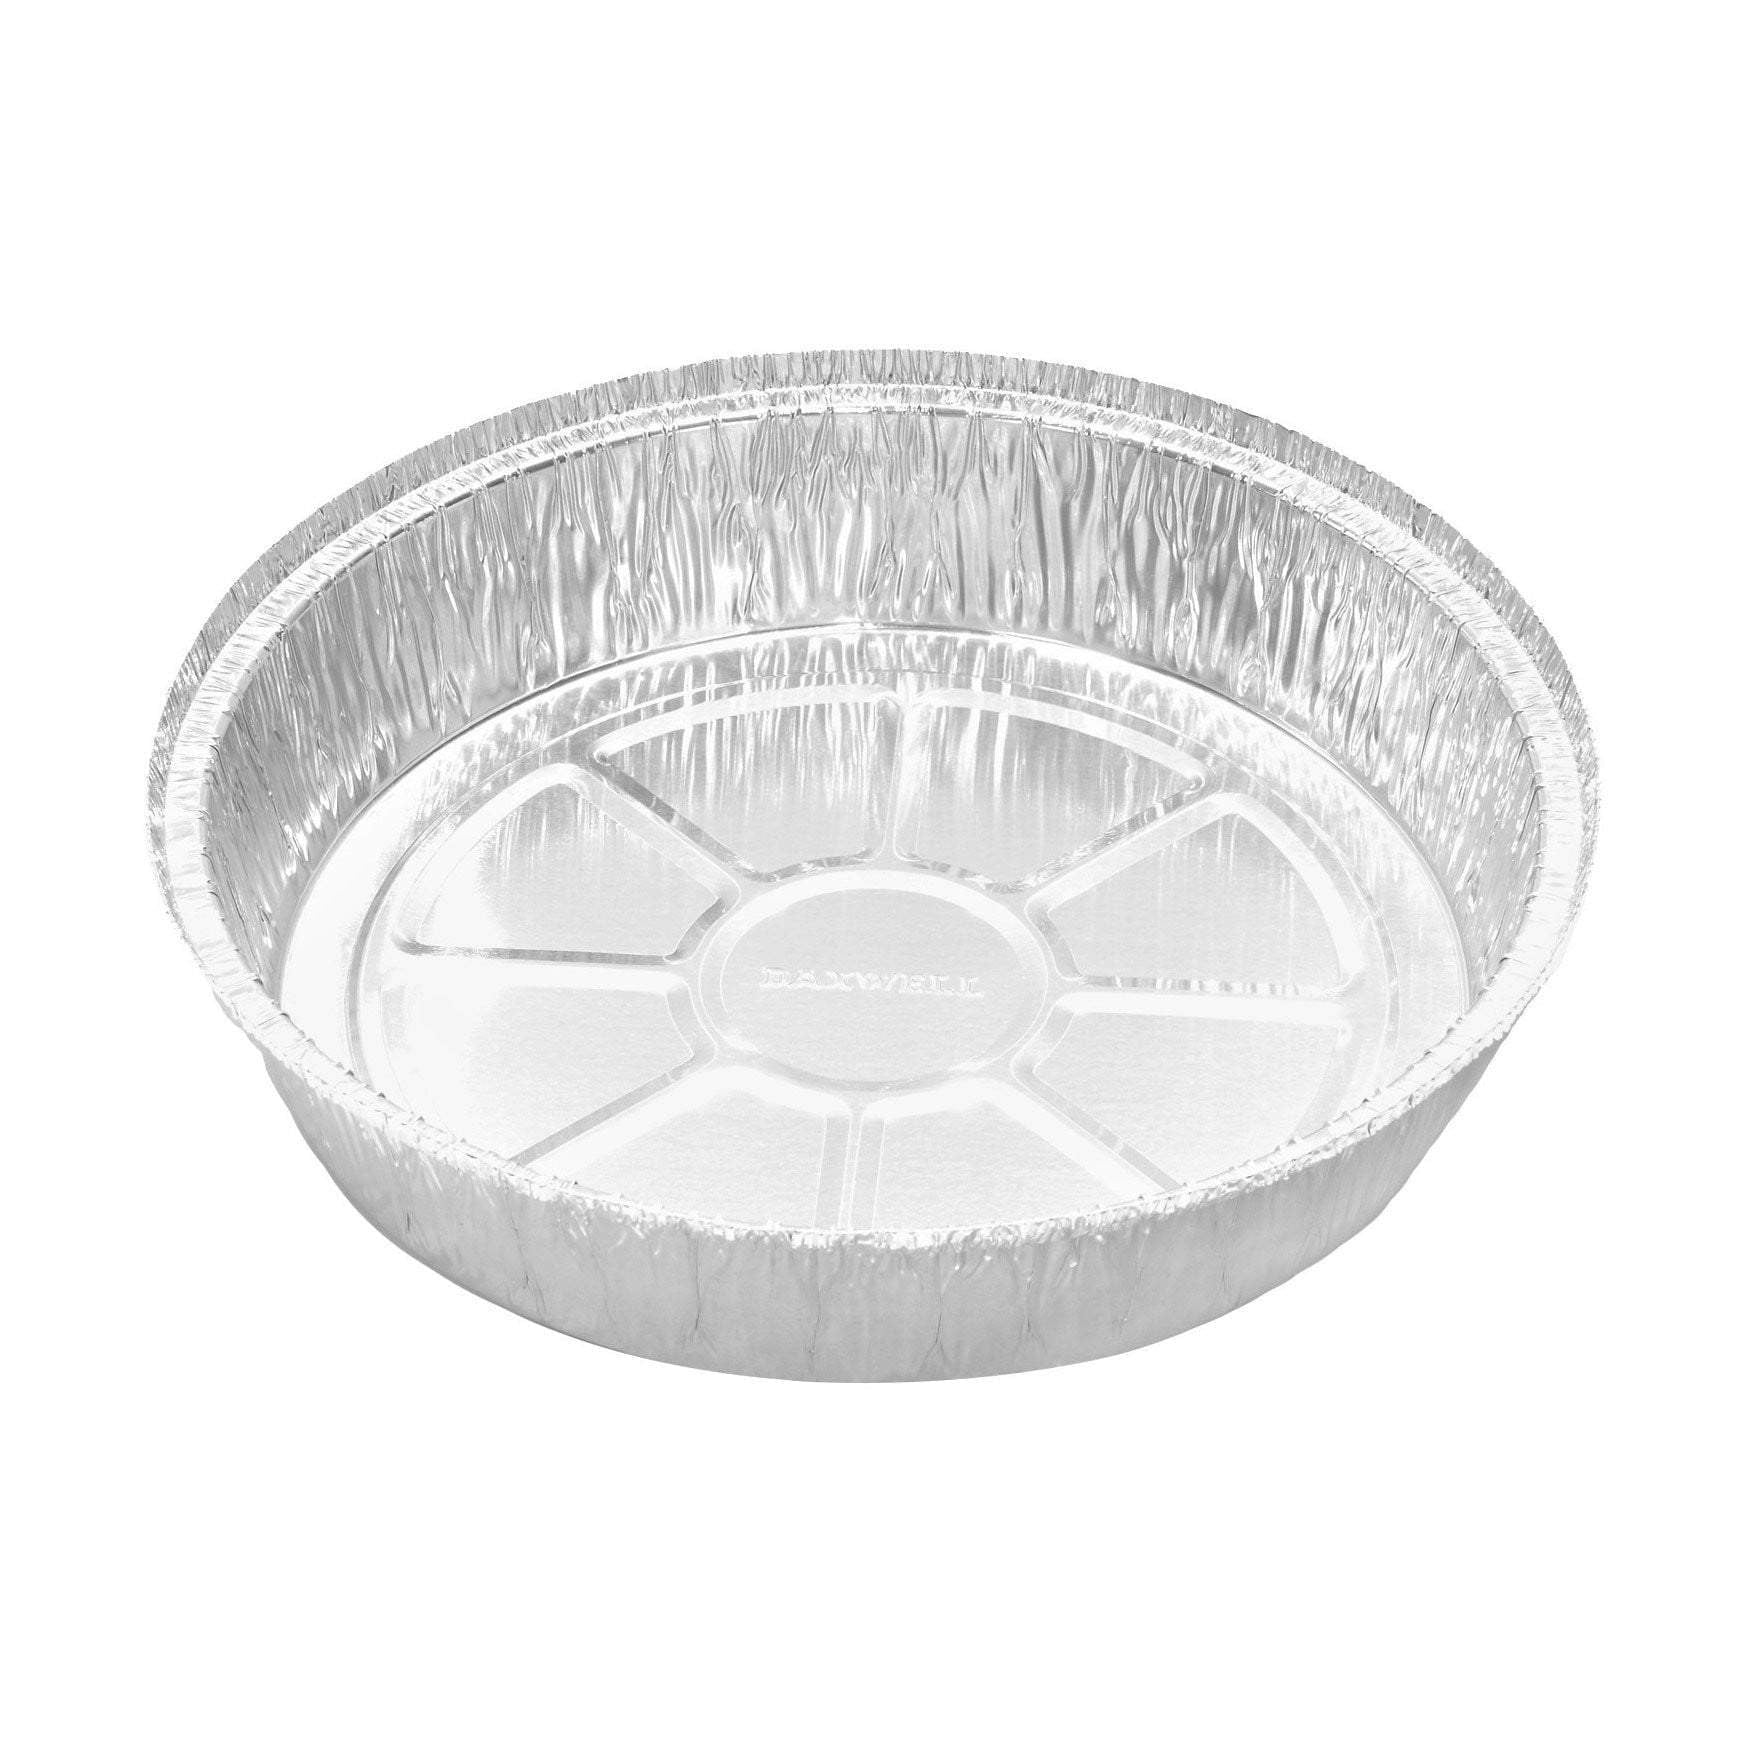 https://cdn.shopify.com/s/files/1/0276/2404/6661/products/daxwell-foilcontainers-round-pan-9-inches_1800x1800.jpg?v=1601907160